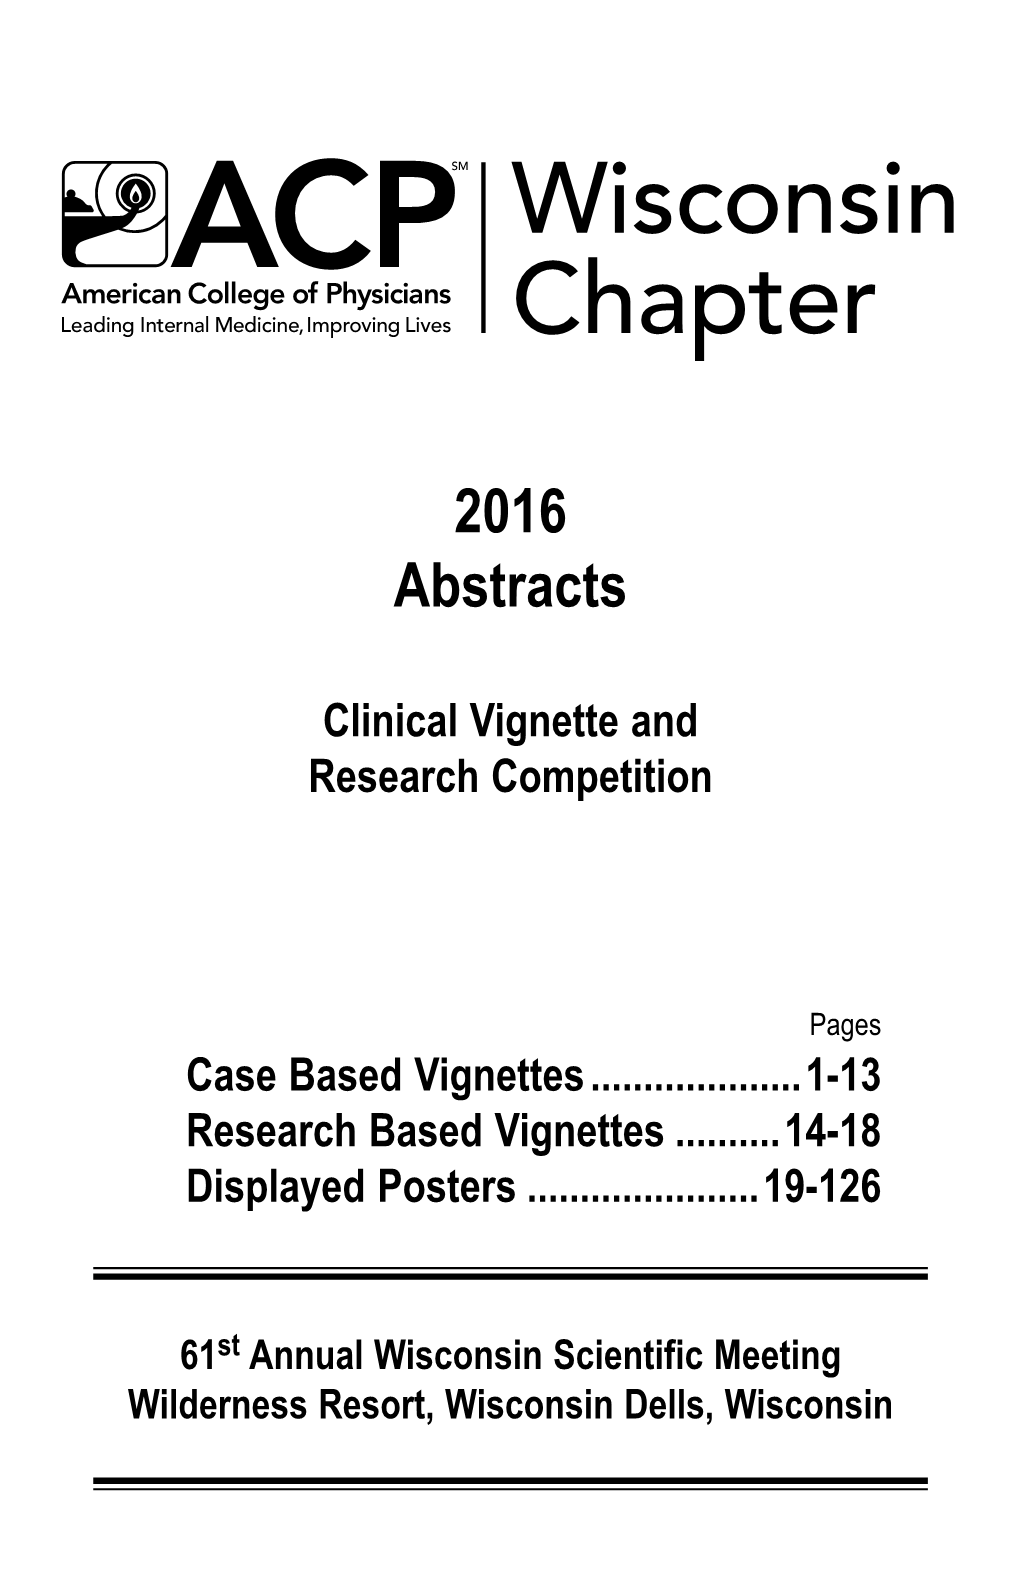 American College of Physicians, Wisconsin Chapter, 2016 Abstracts